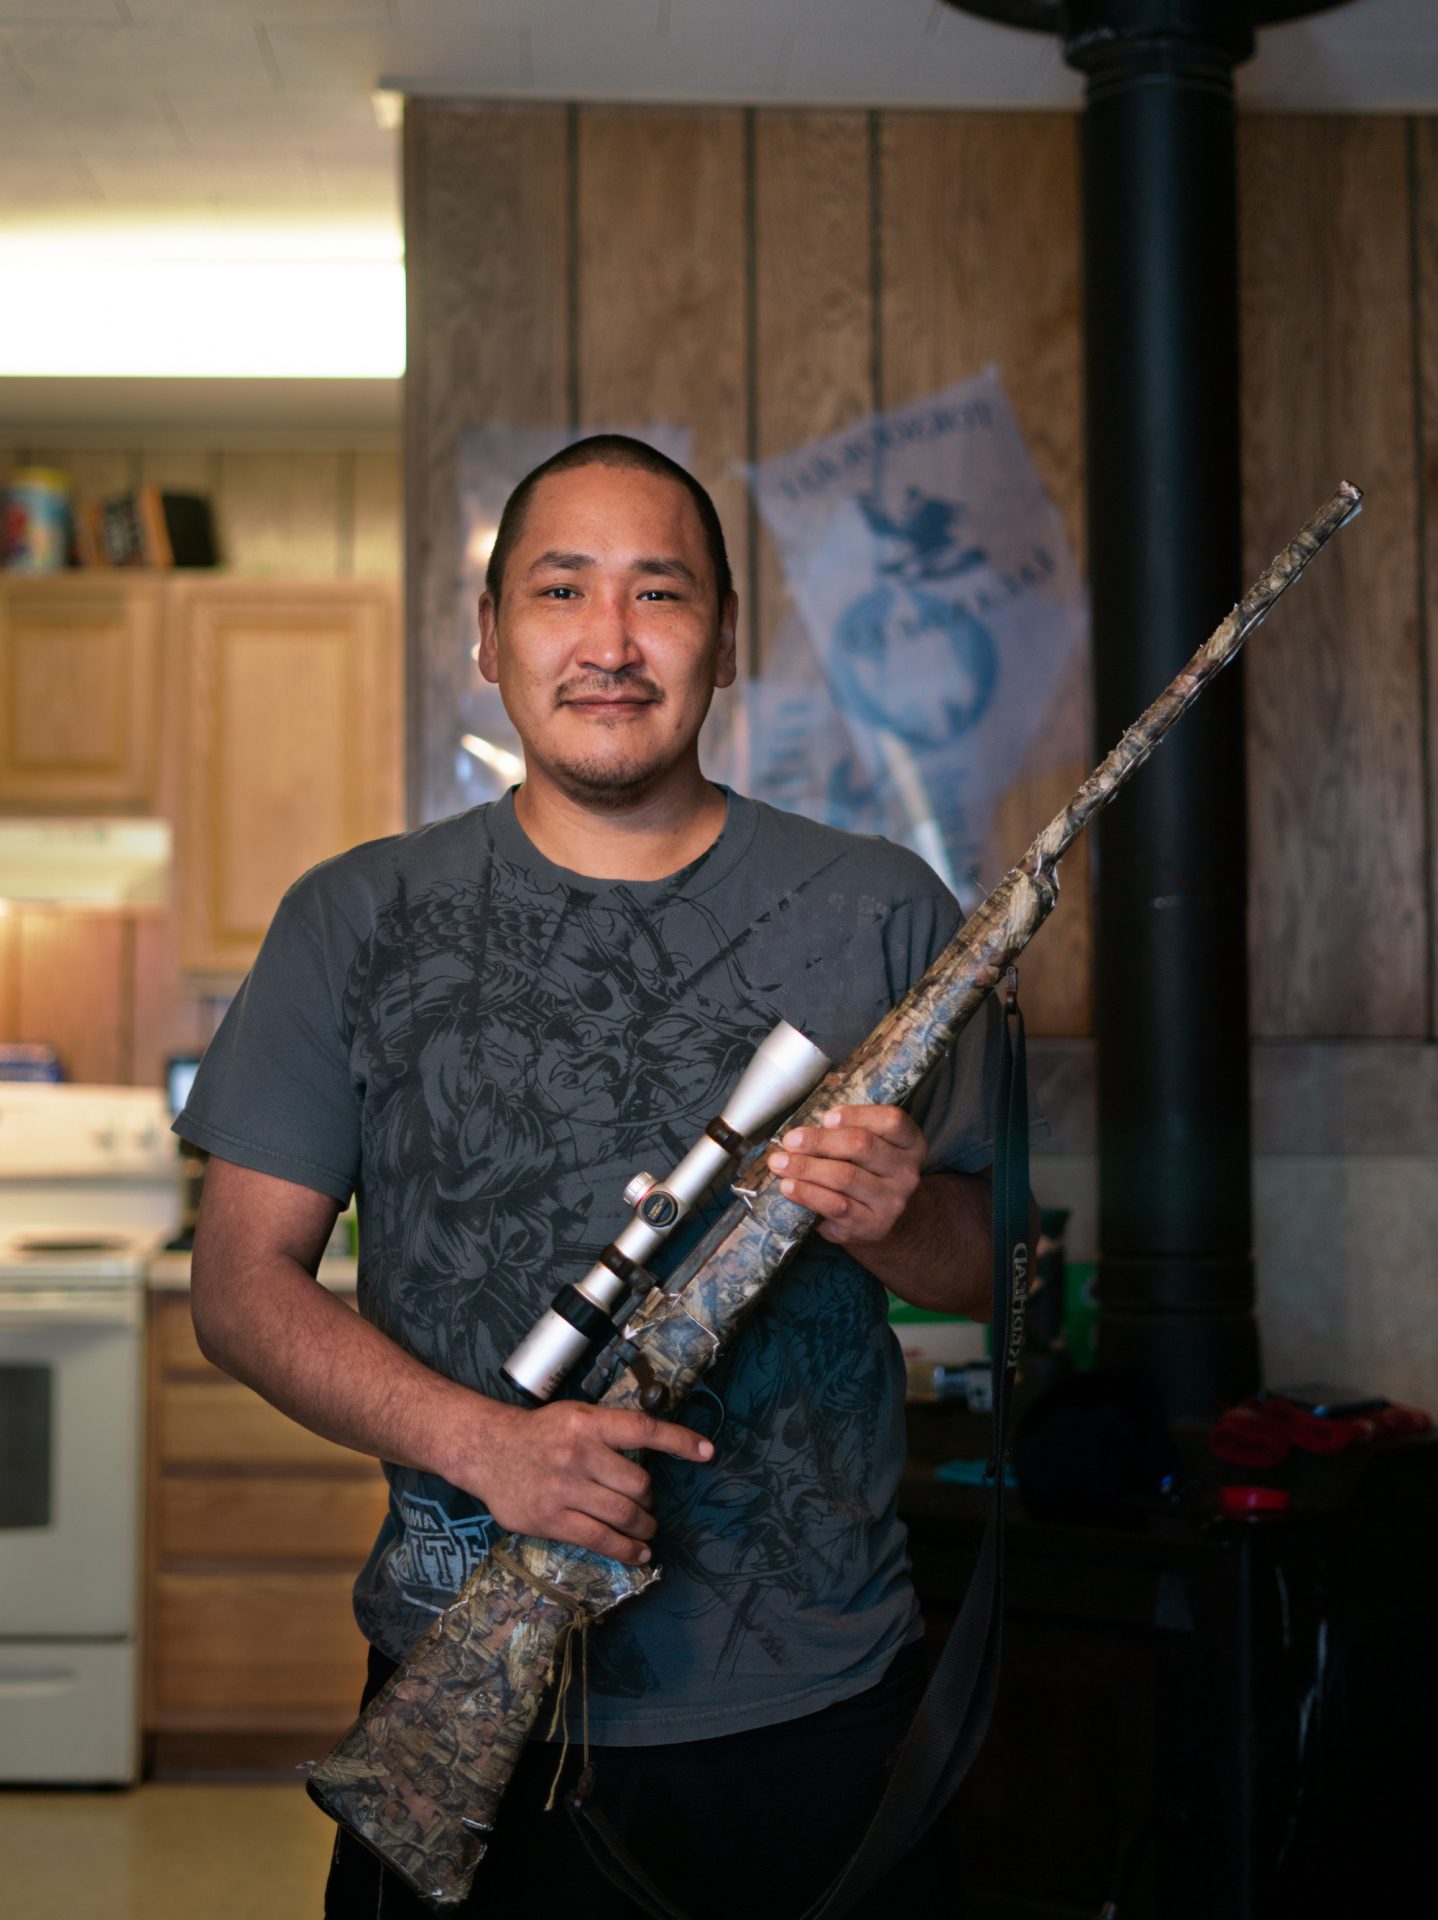 Noah Lincoln holds a gun his family uses for hunting. People in Toksook Bay rely on hunting and other subsistence activities.